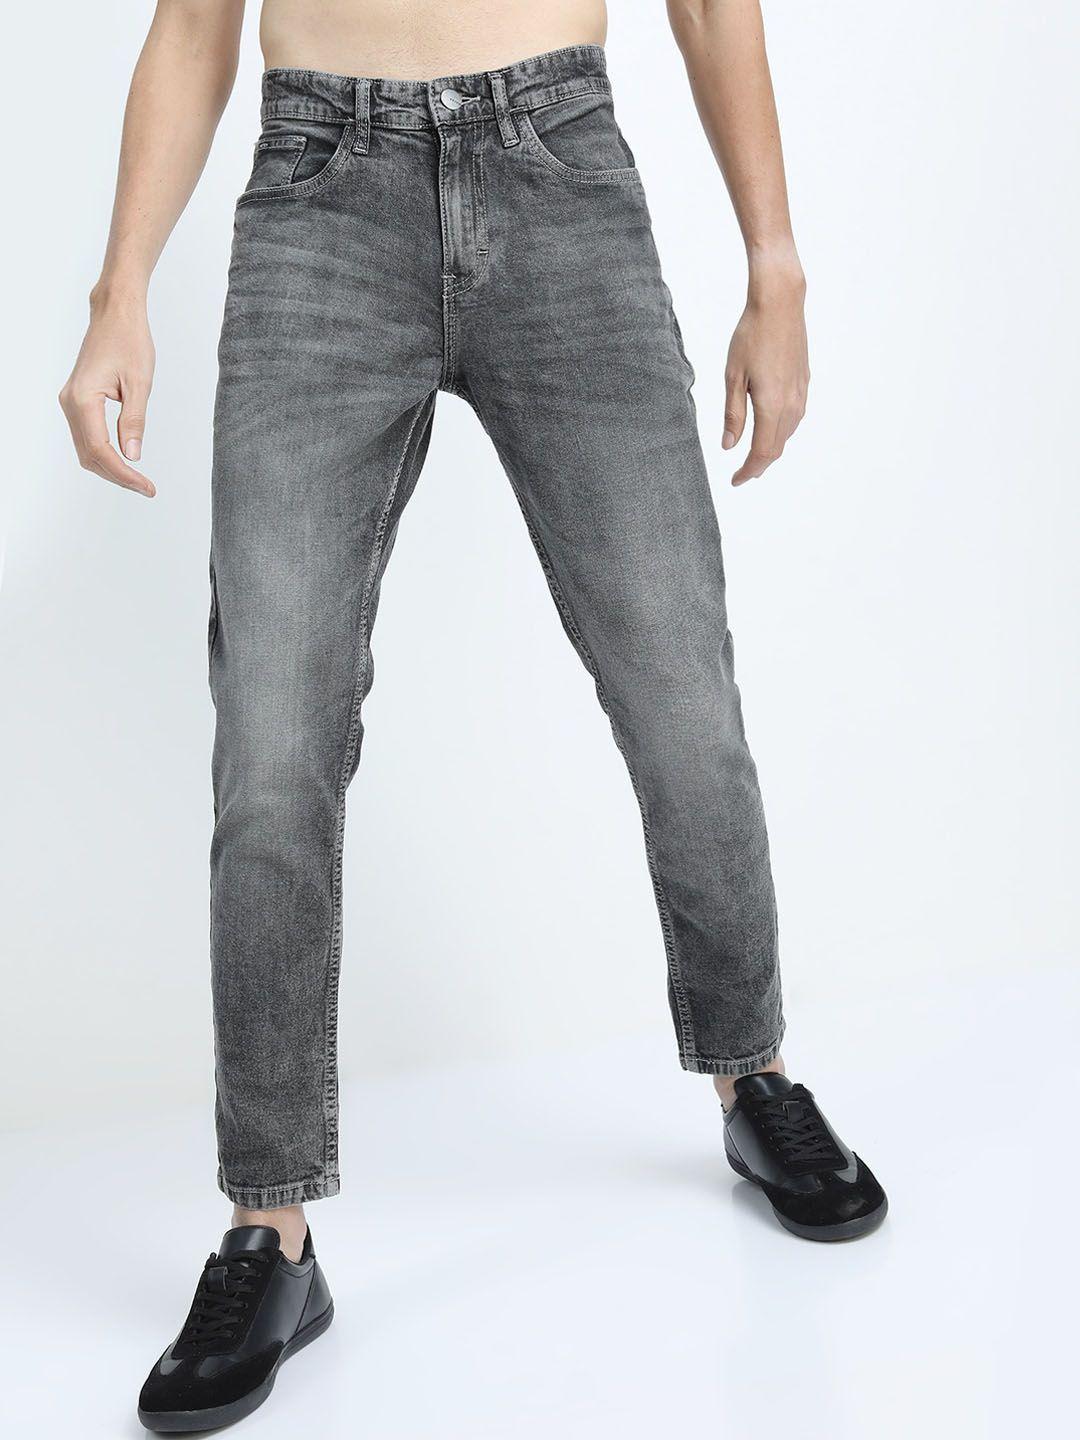 ketch-men-grey-tapered-fit-heavy-fade-cropped-jeans